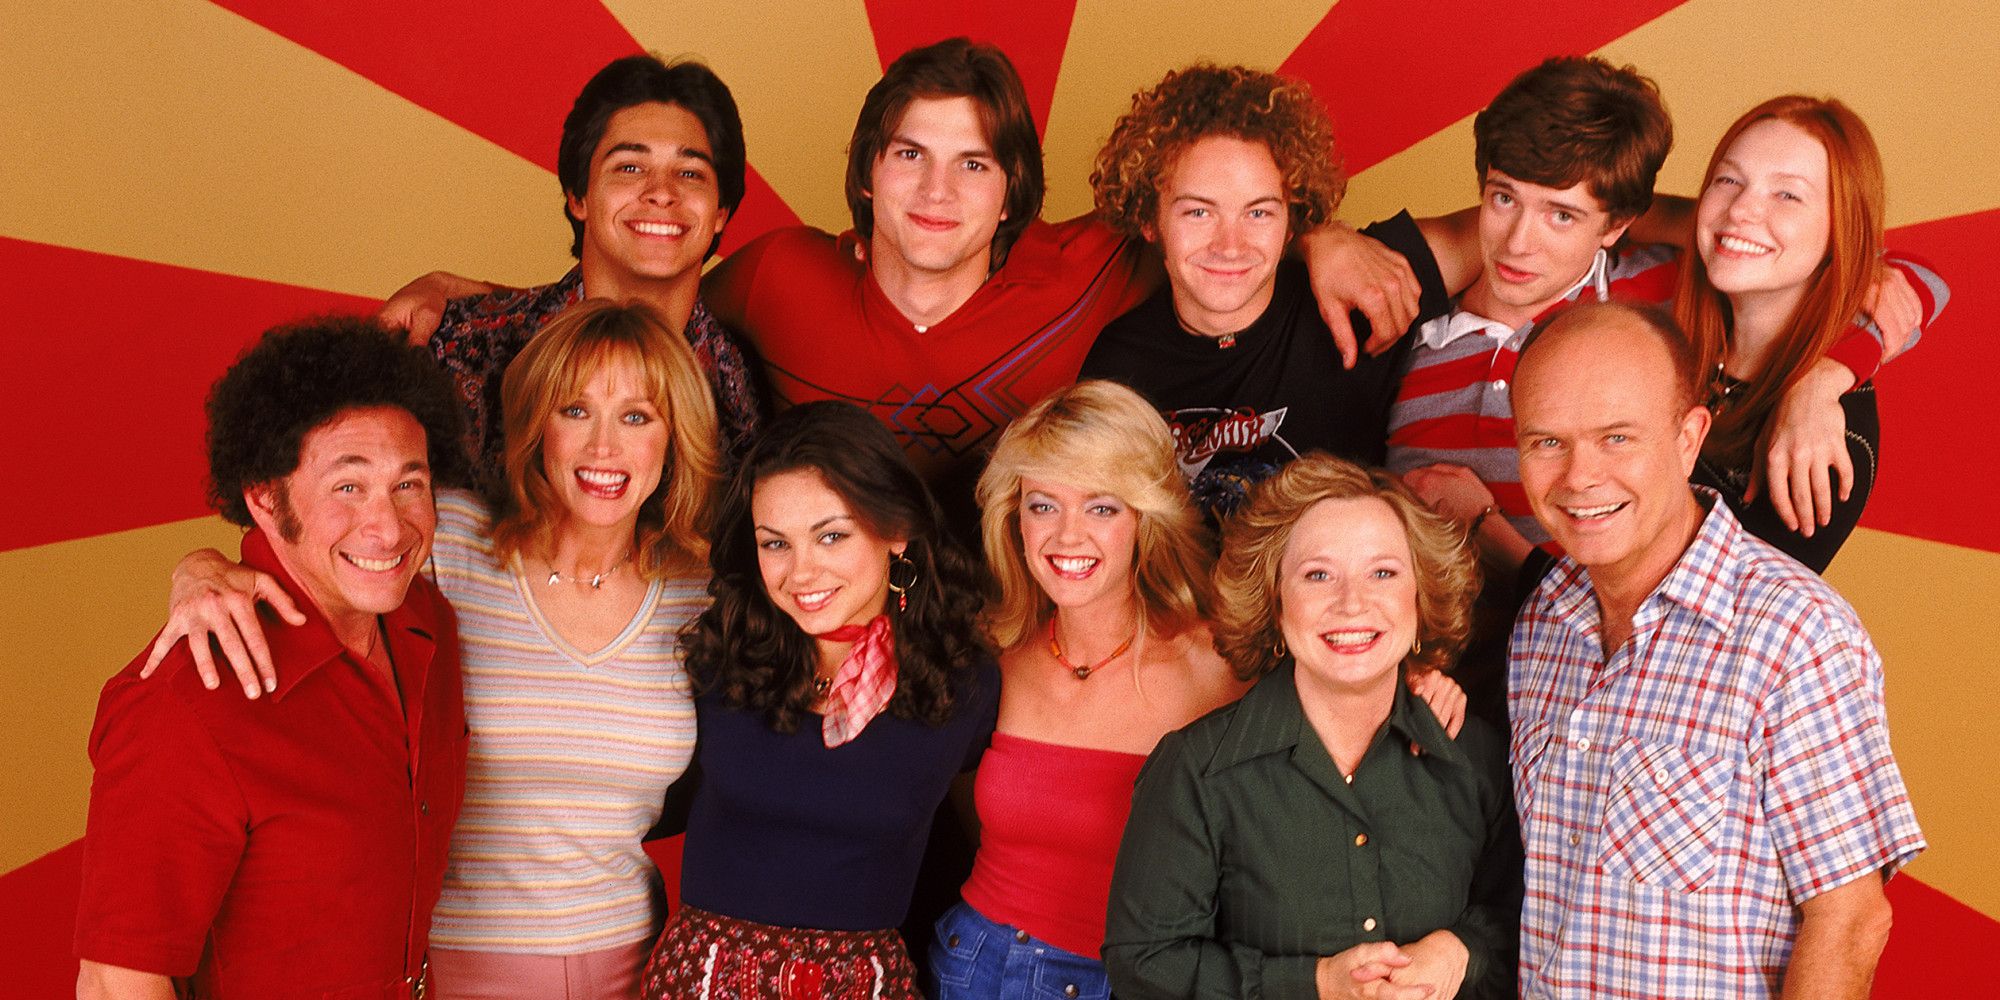 That '70s Show The 15 Best Episodes Ranked (According To IMDb)